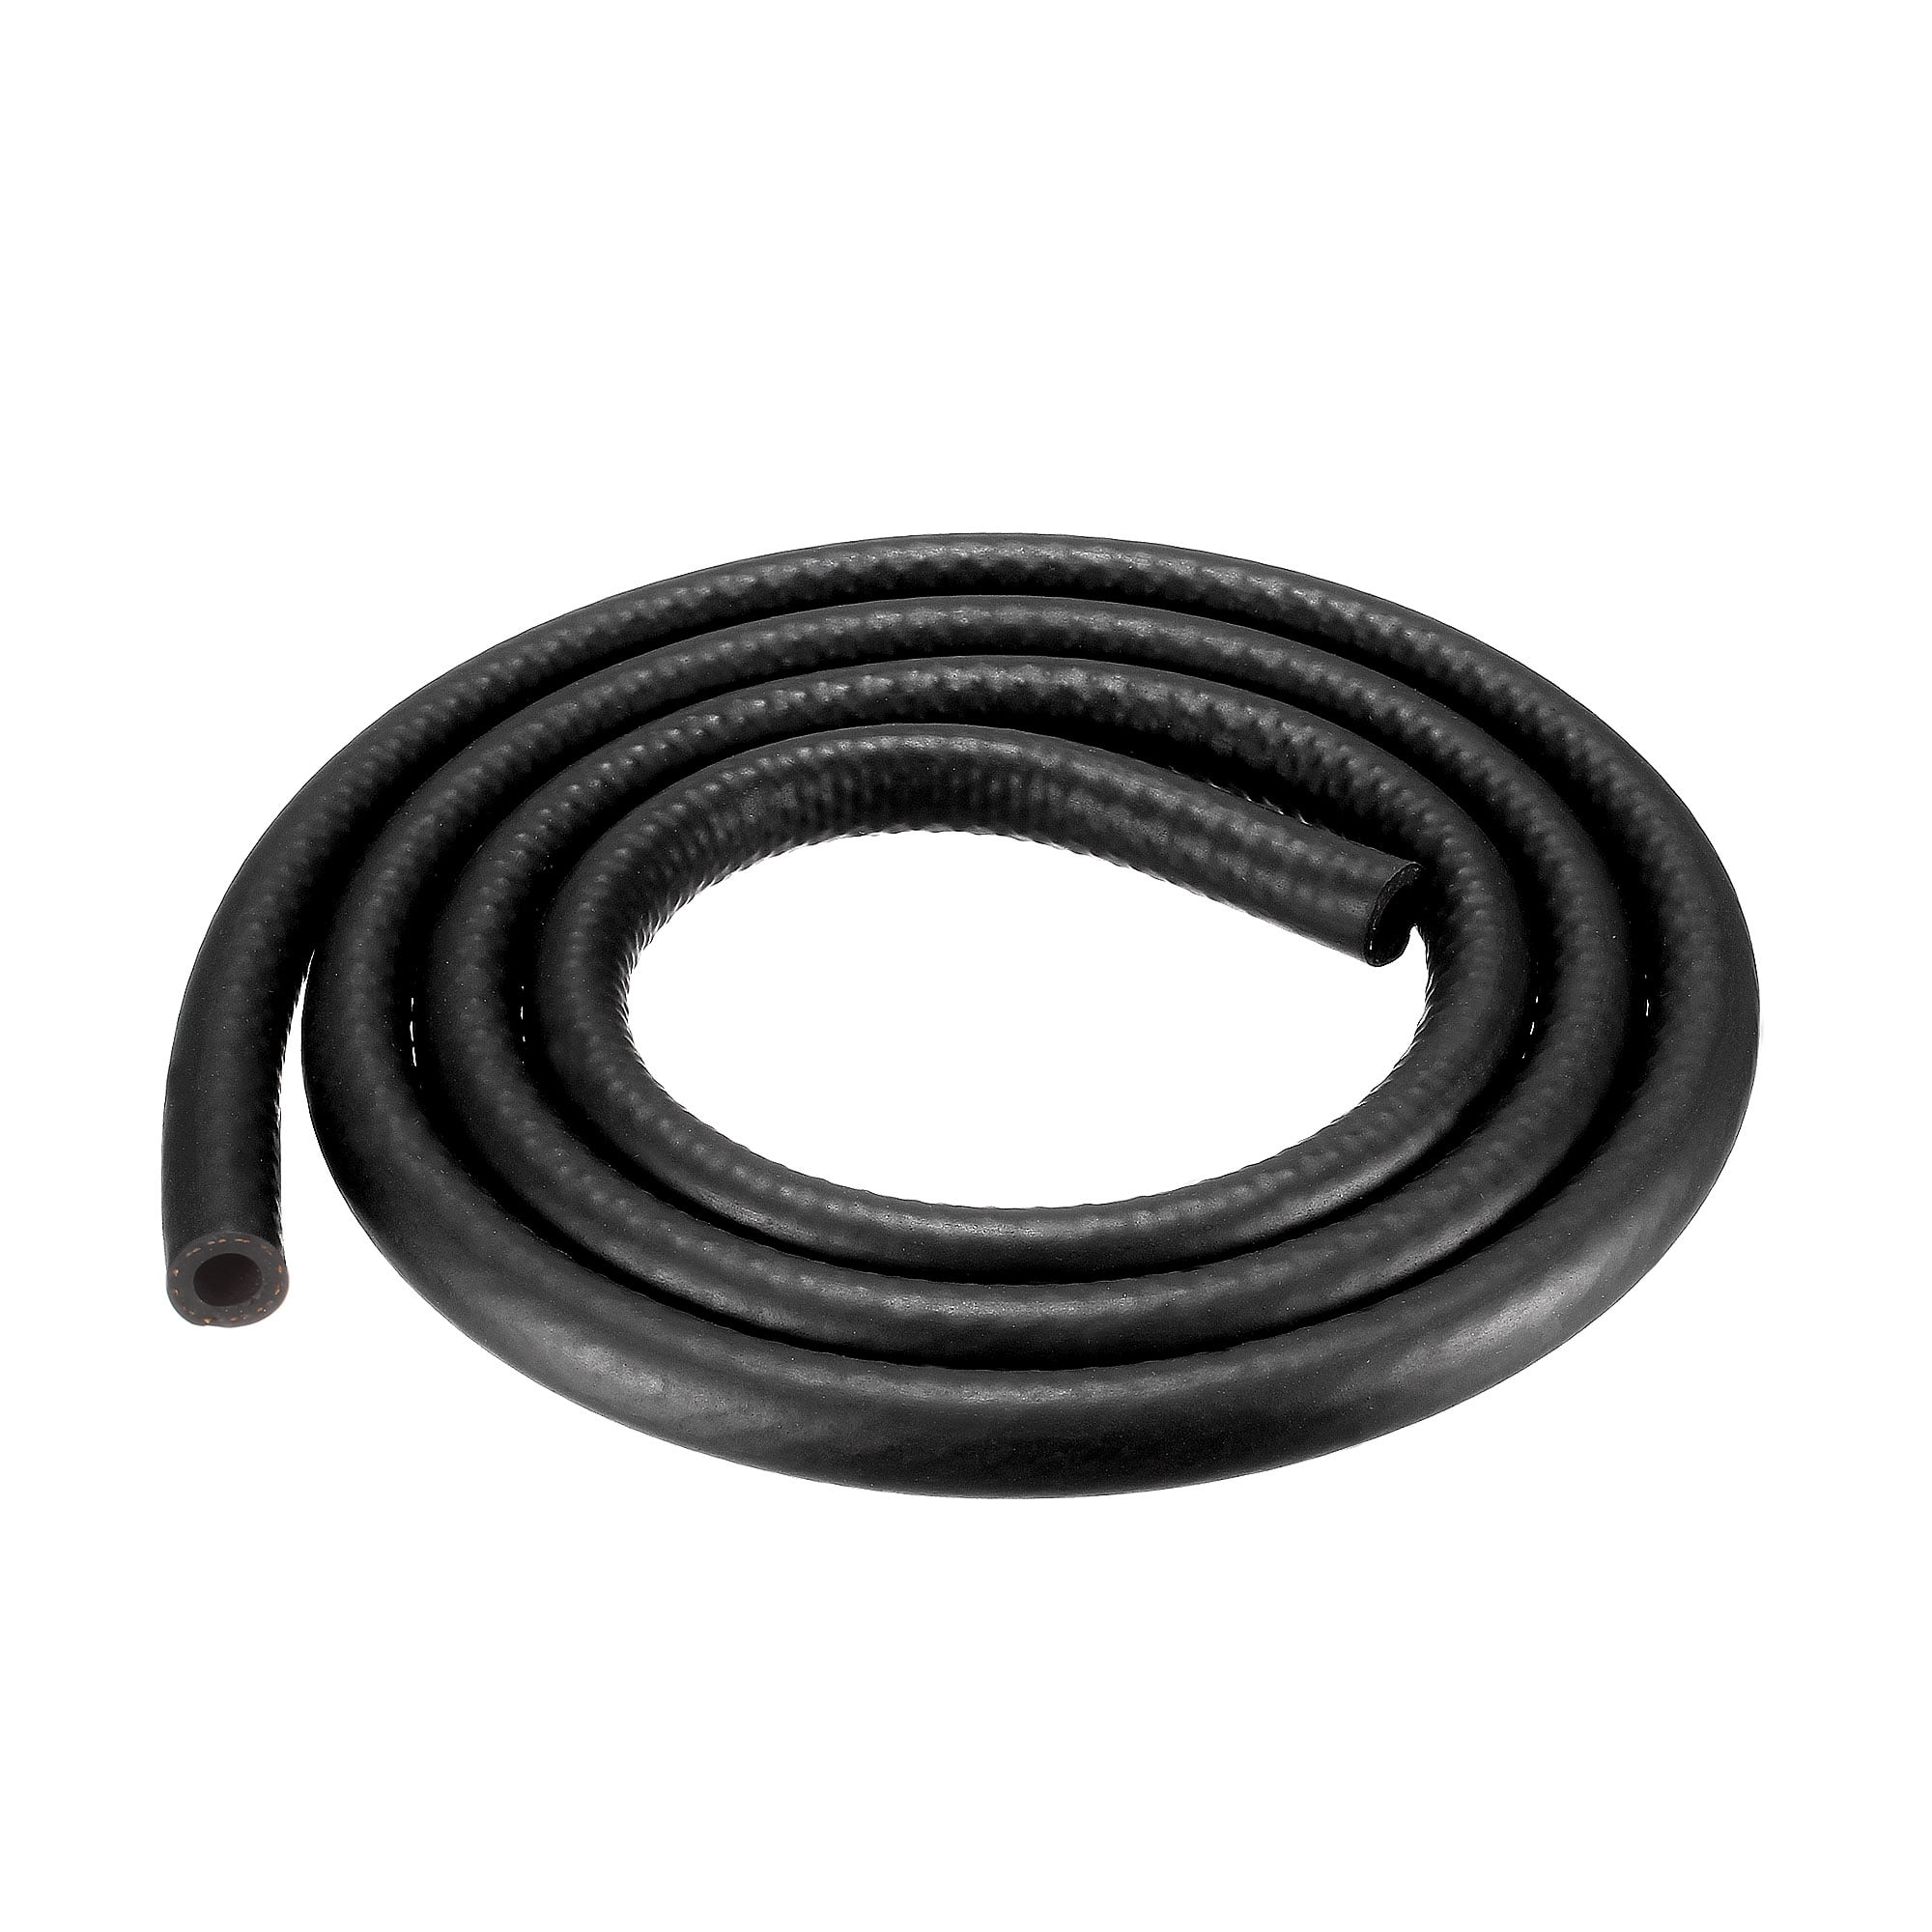 NBR 5mm ID 8mm OD Water Hose Engine Pipe Fuel Gas Line Hose Replacement New 